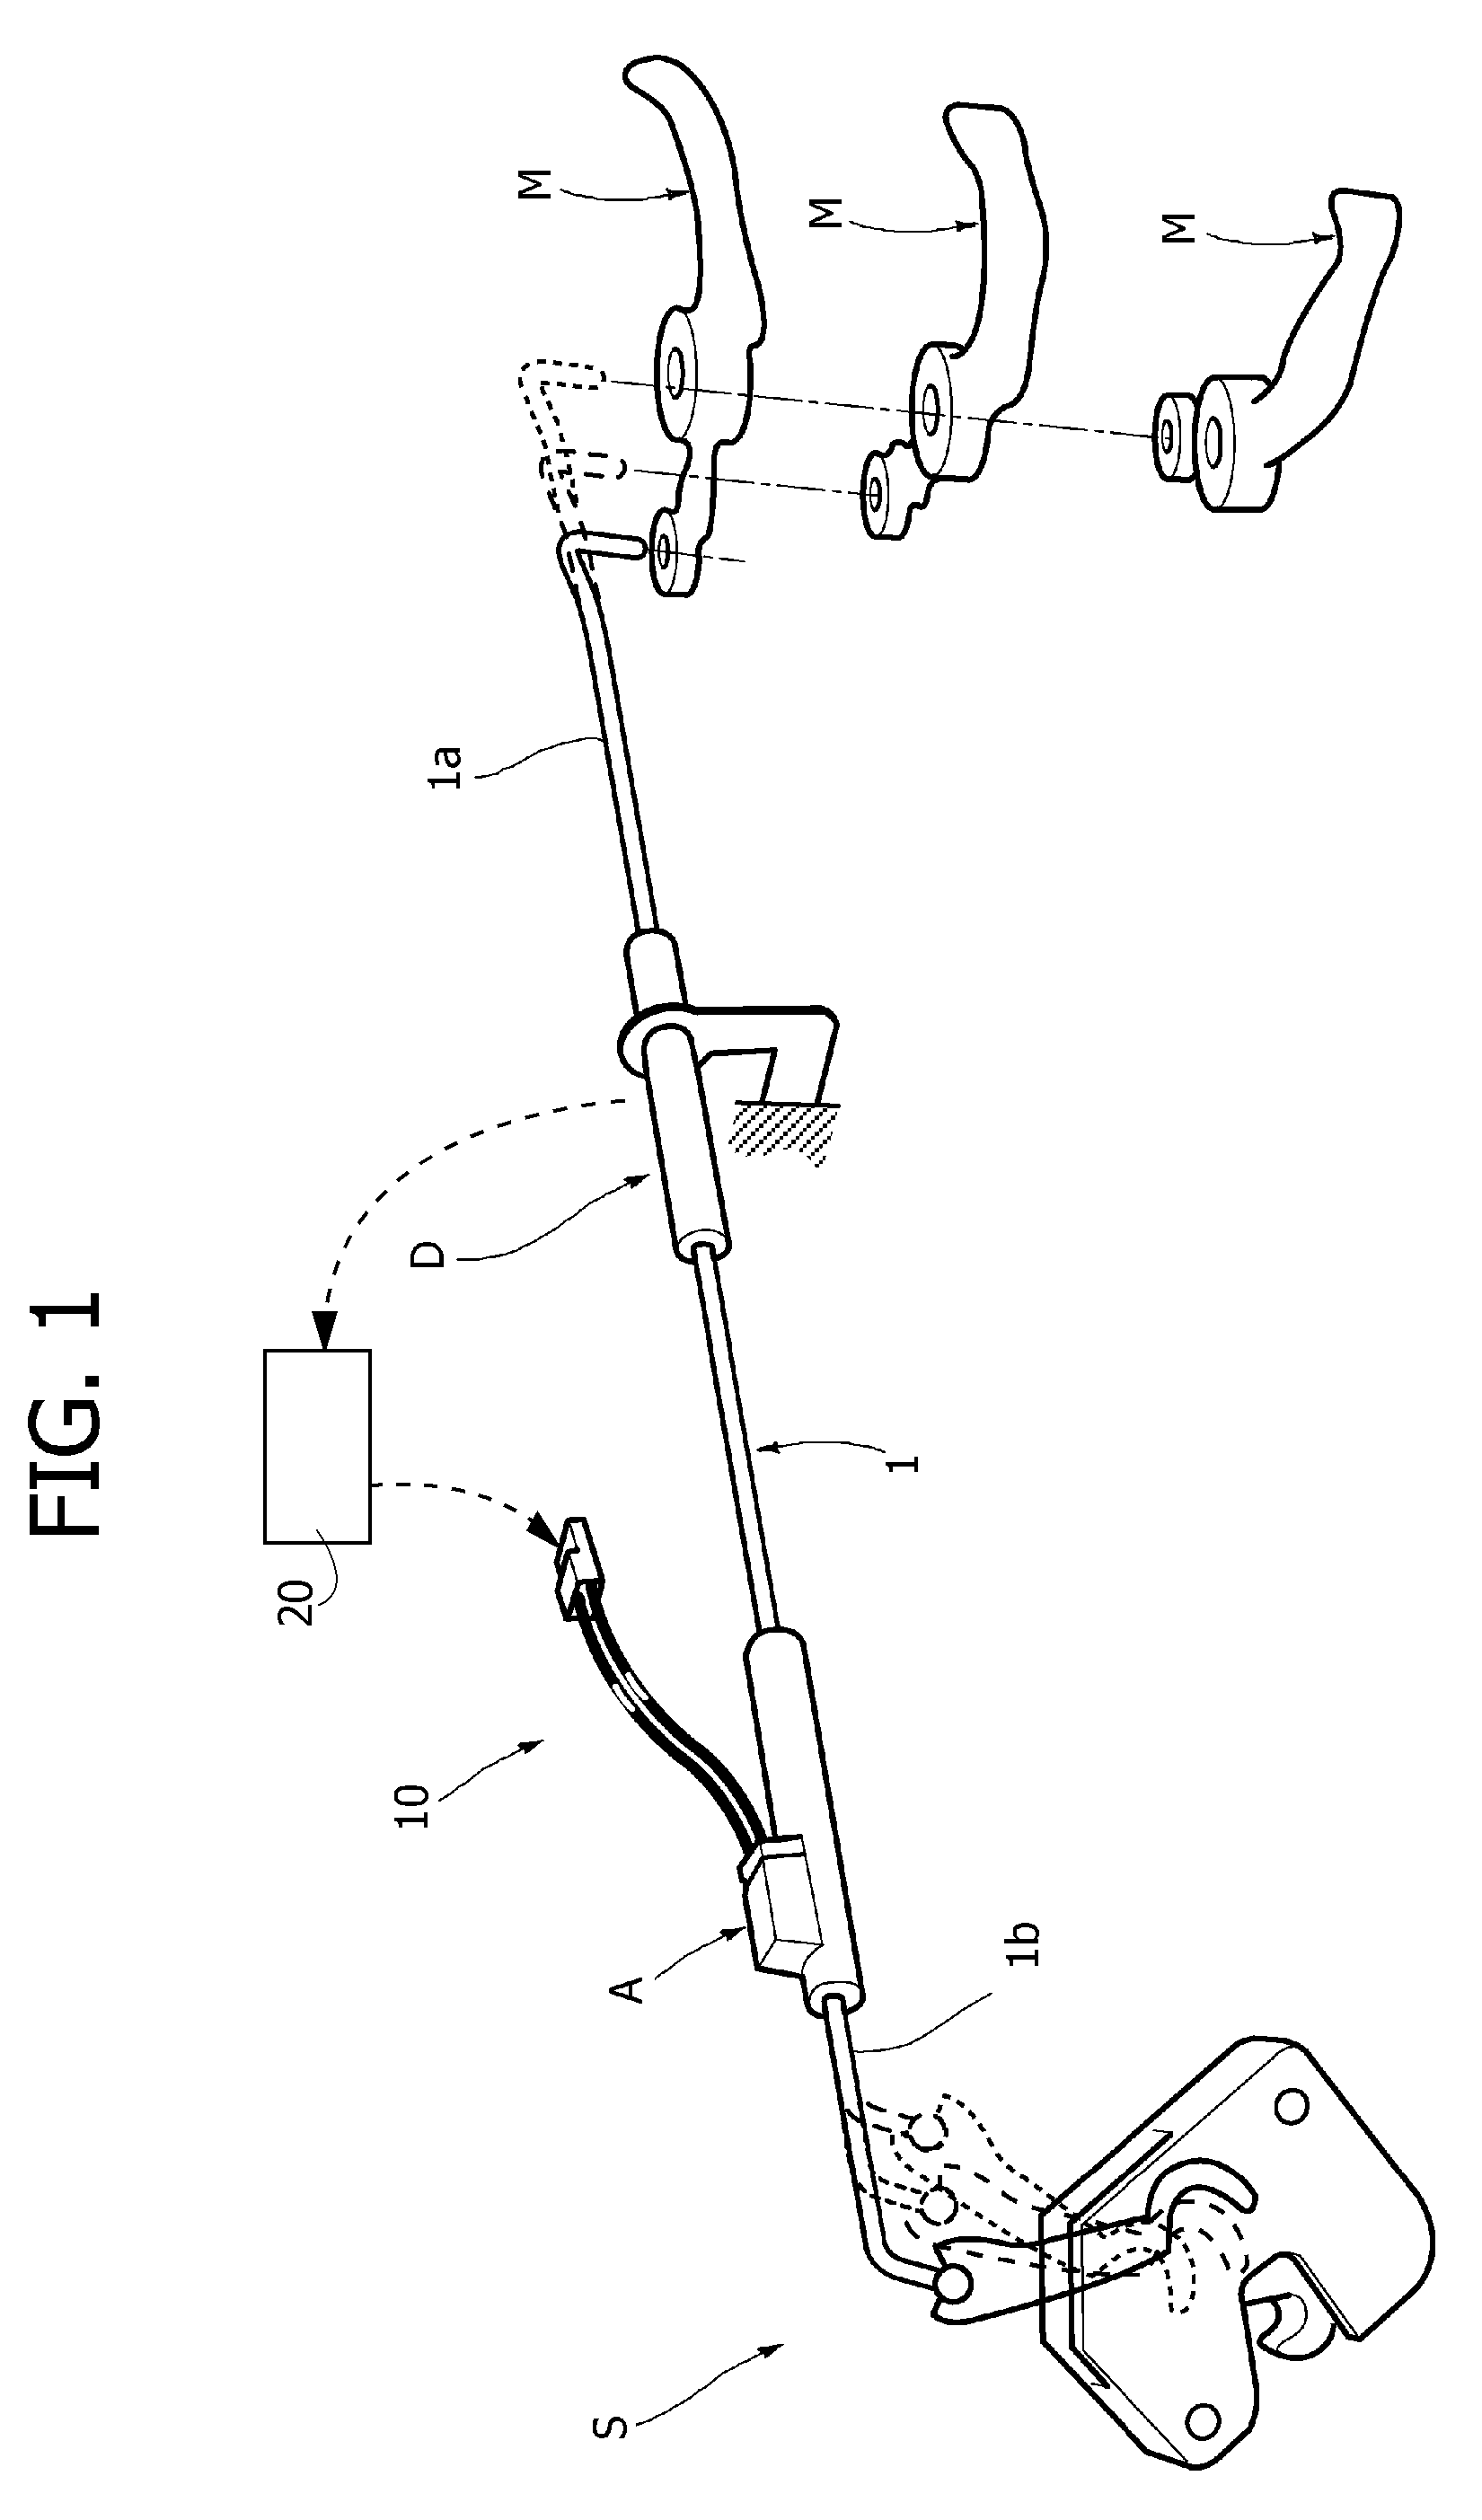 Manual actuating system assisted by a shape-memory actuator